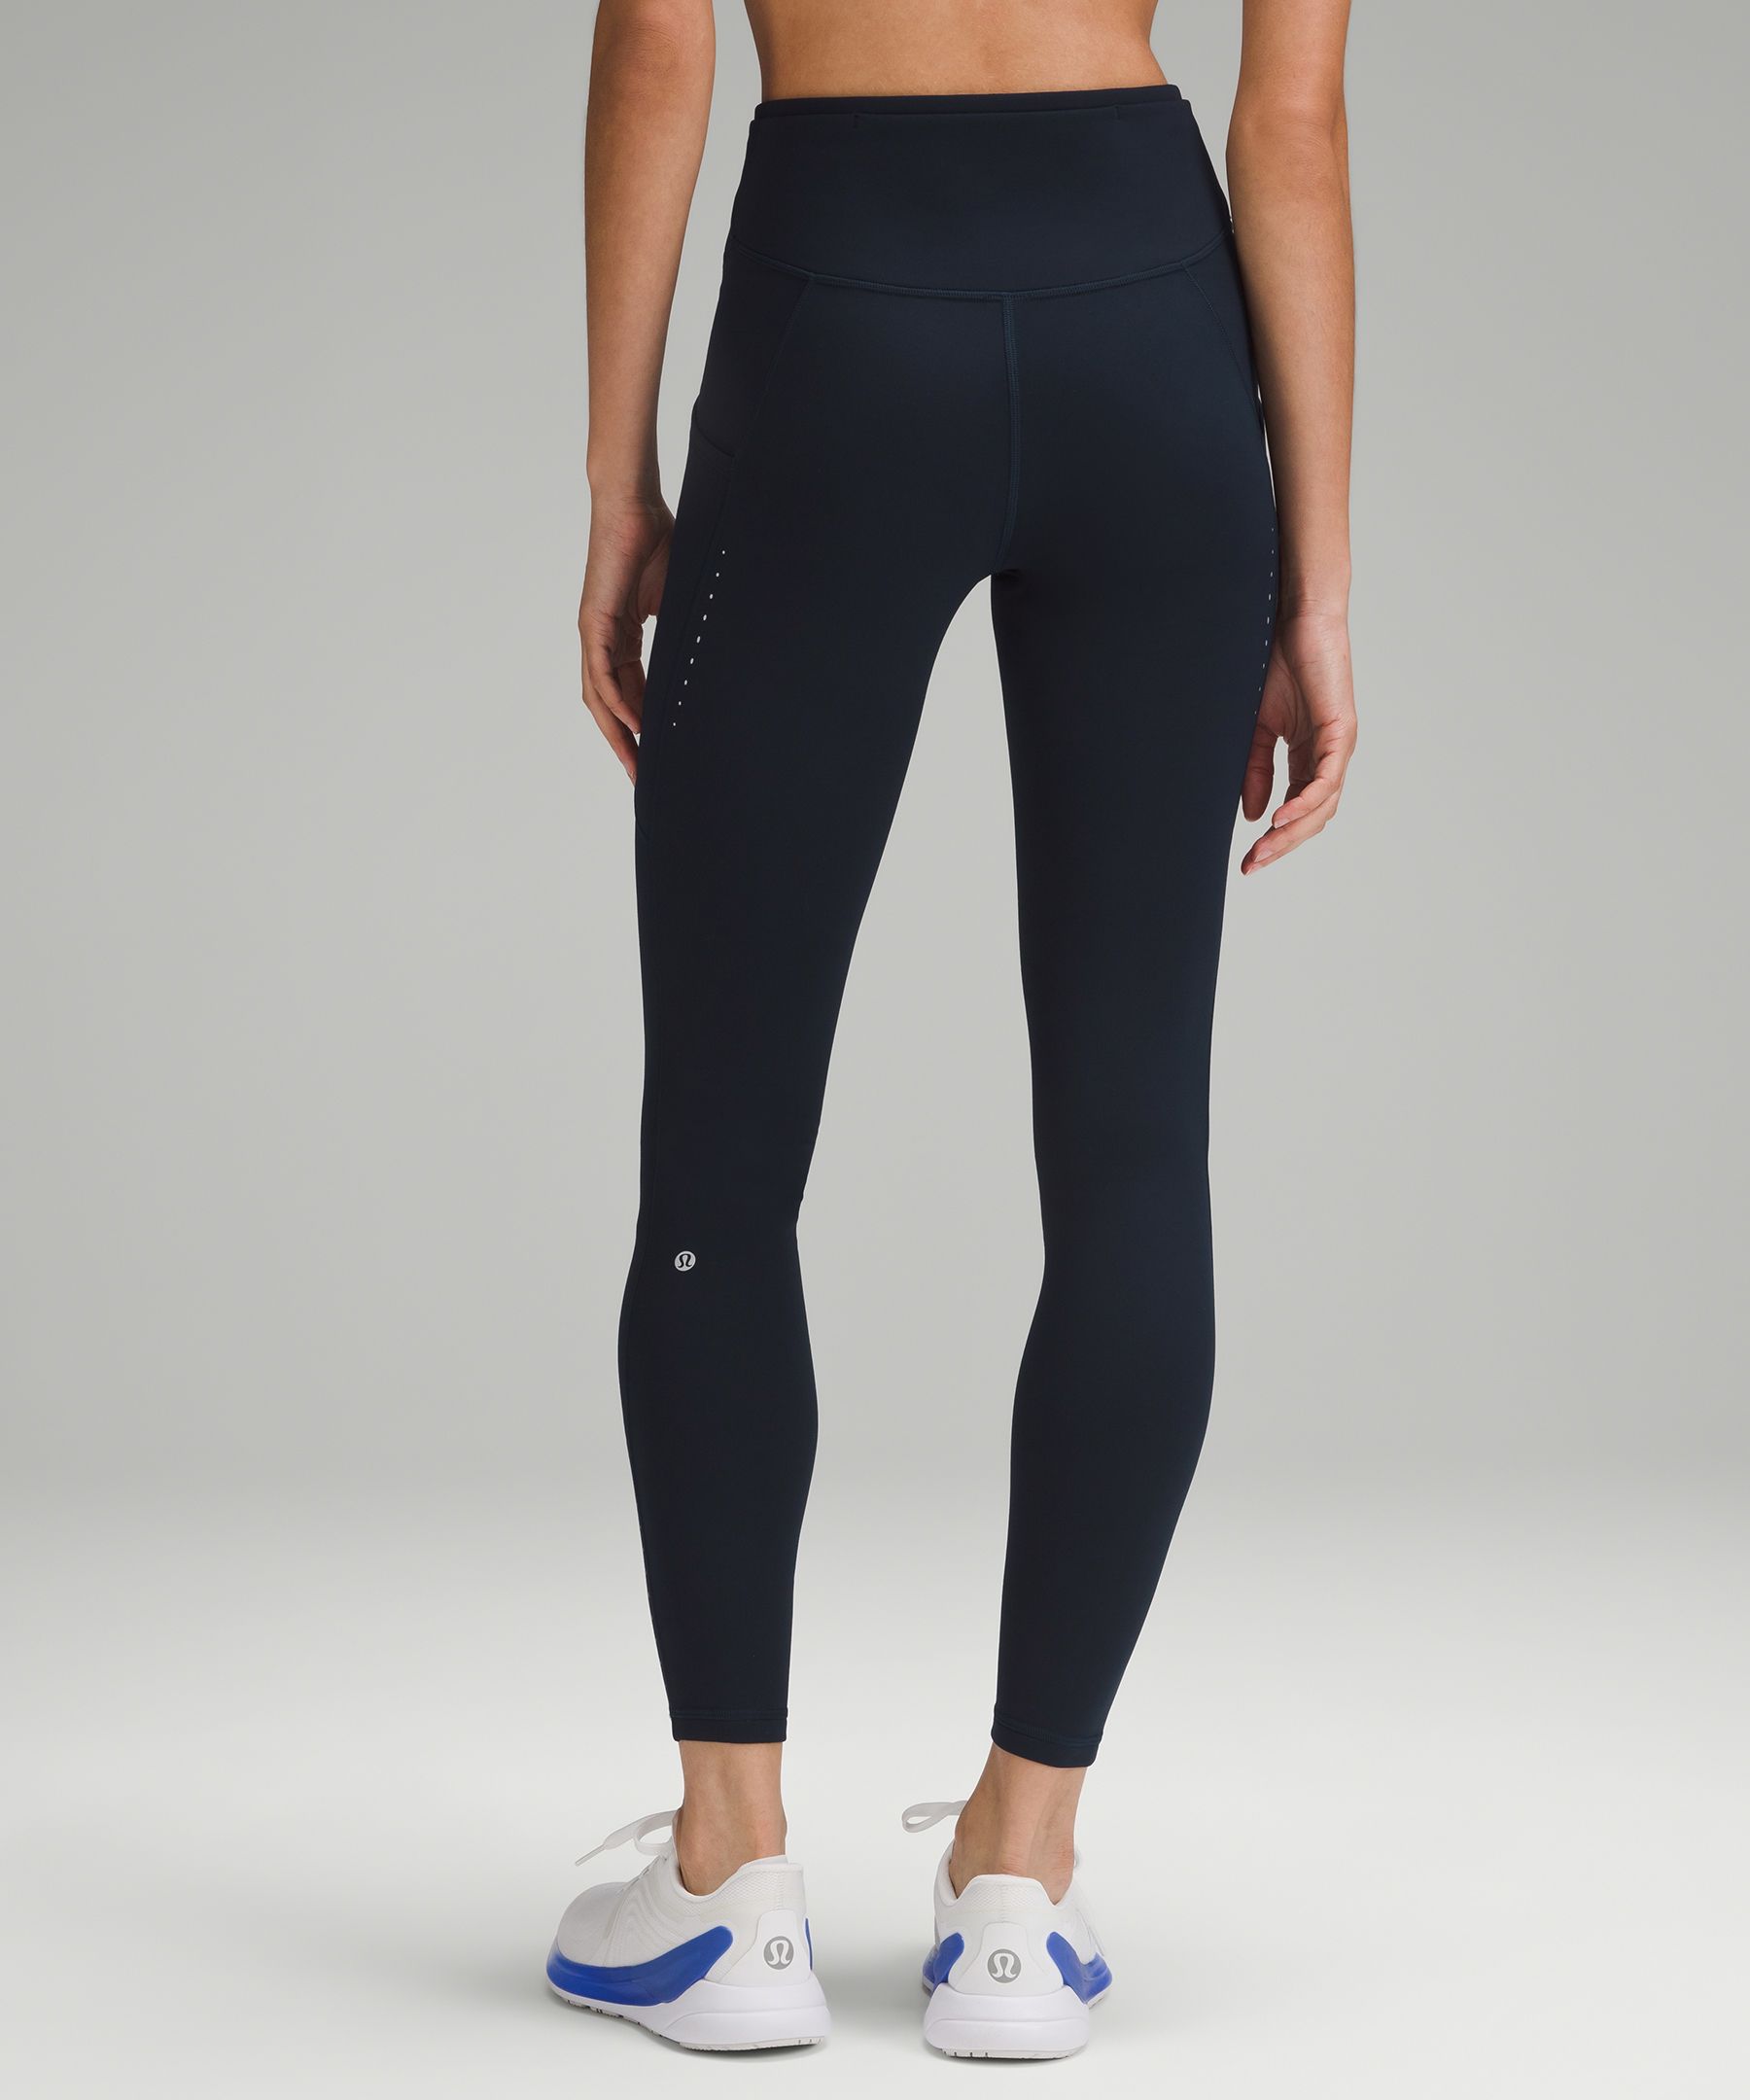 Fast and Free High-Rise Thermal Tight 28 *Pockets, Women's  Leggings/Tights